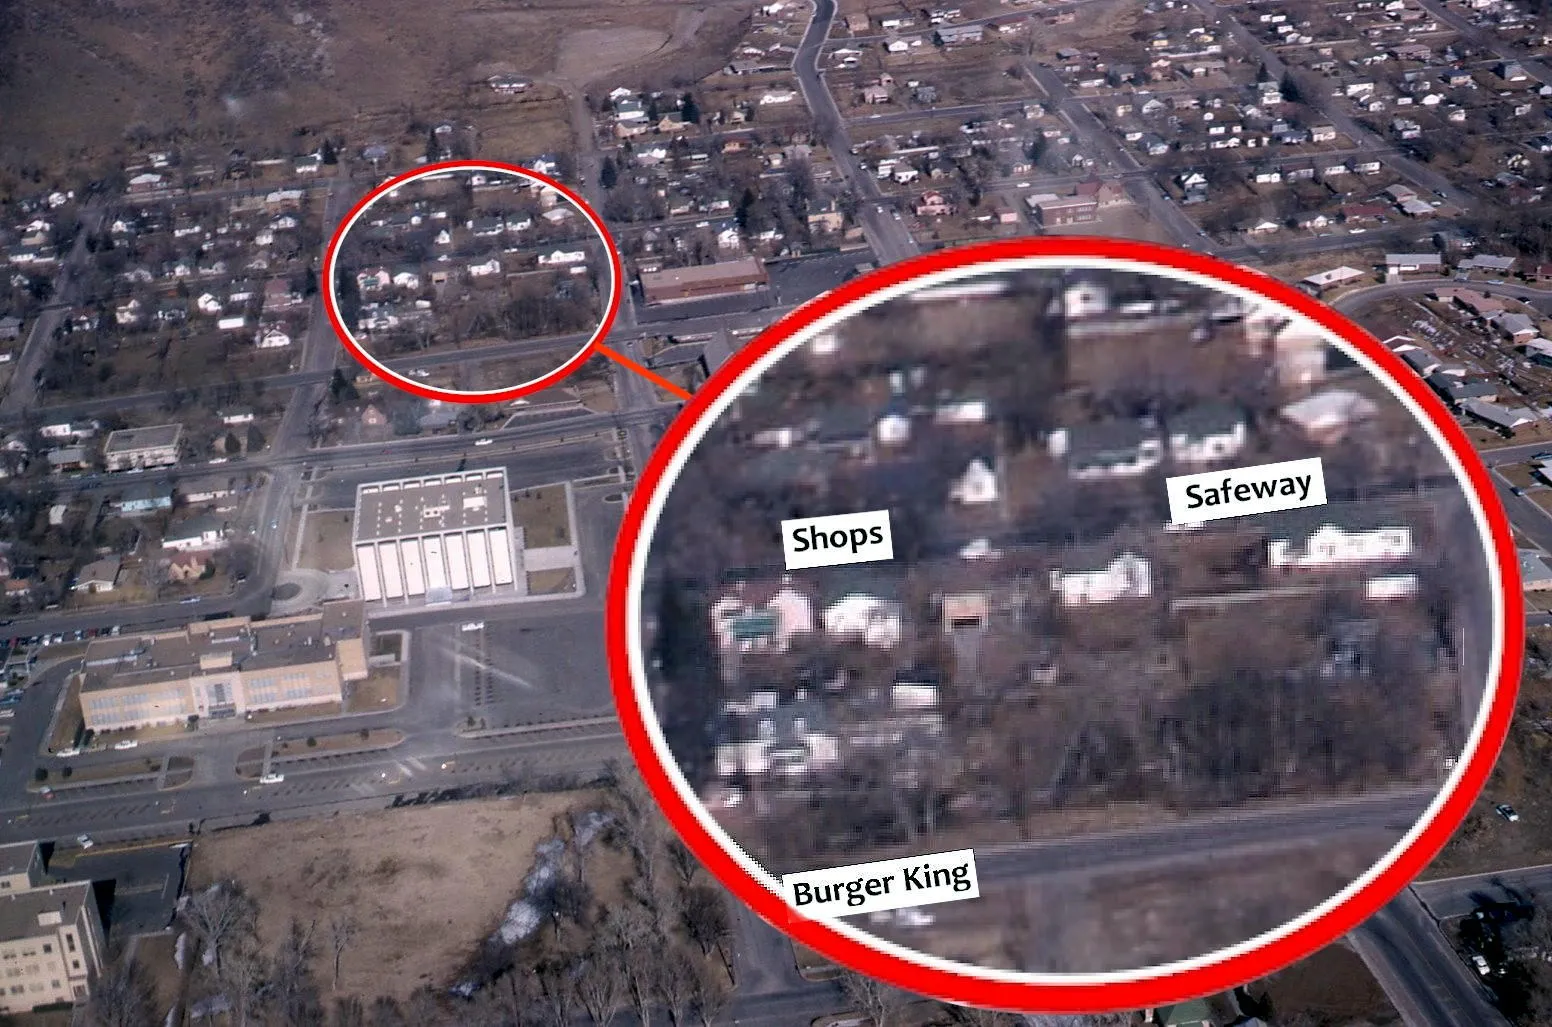 Aerial photo with a one-block area circled.  The block contains trees and houses.